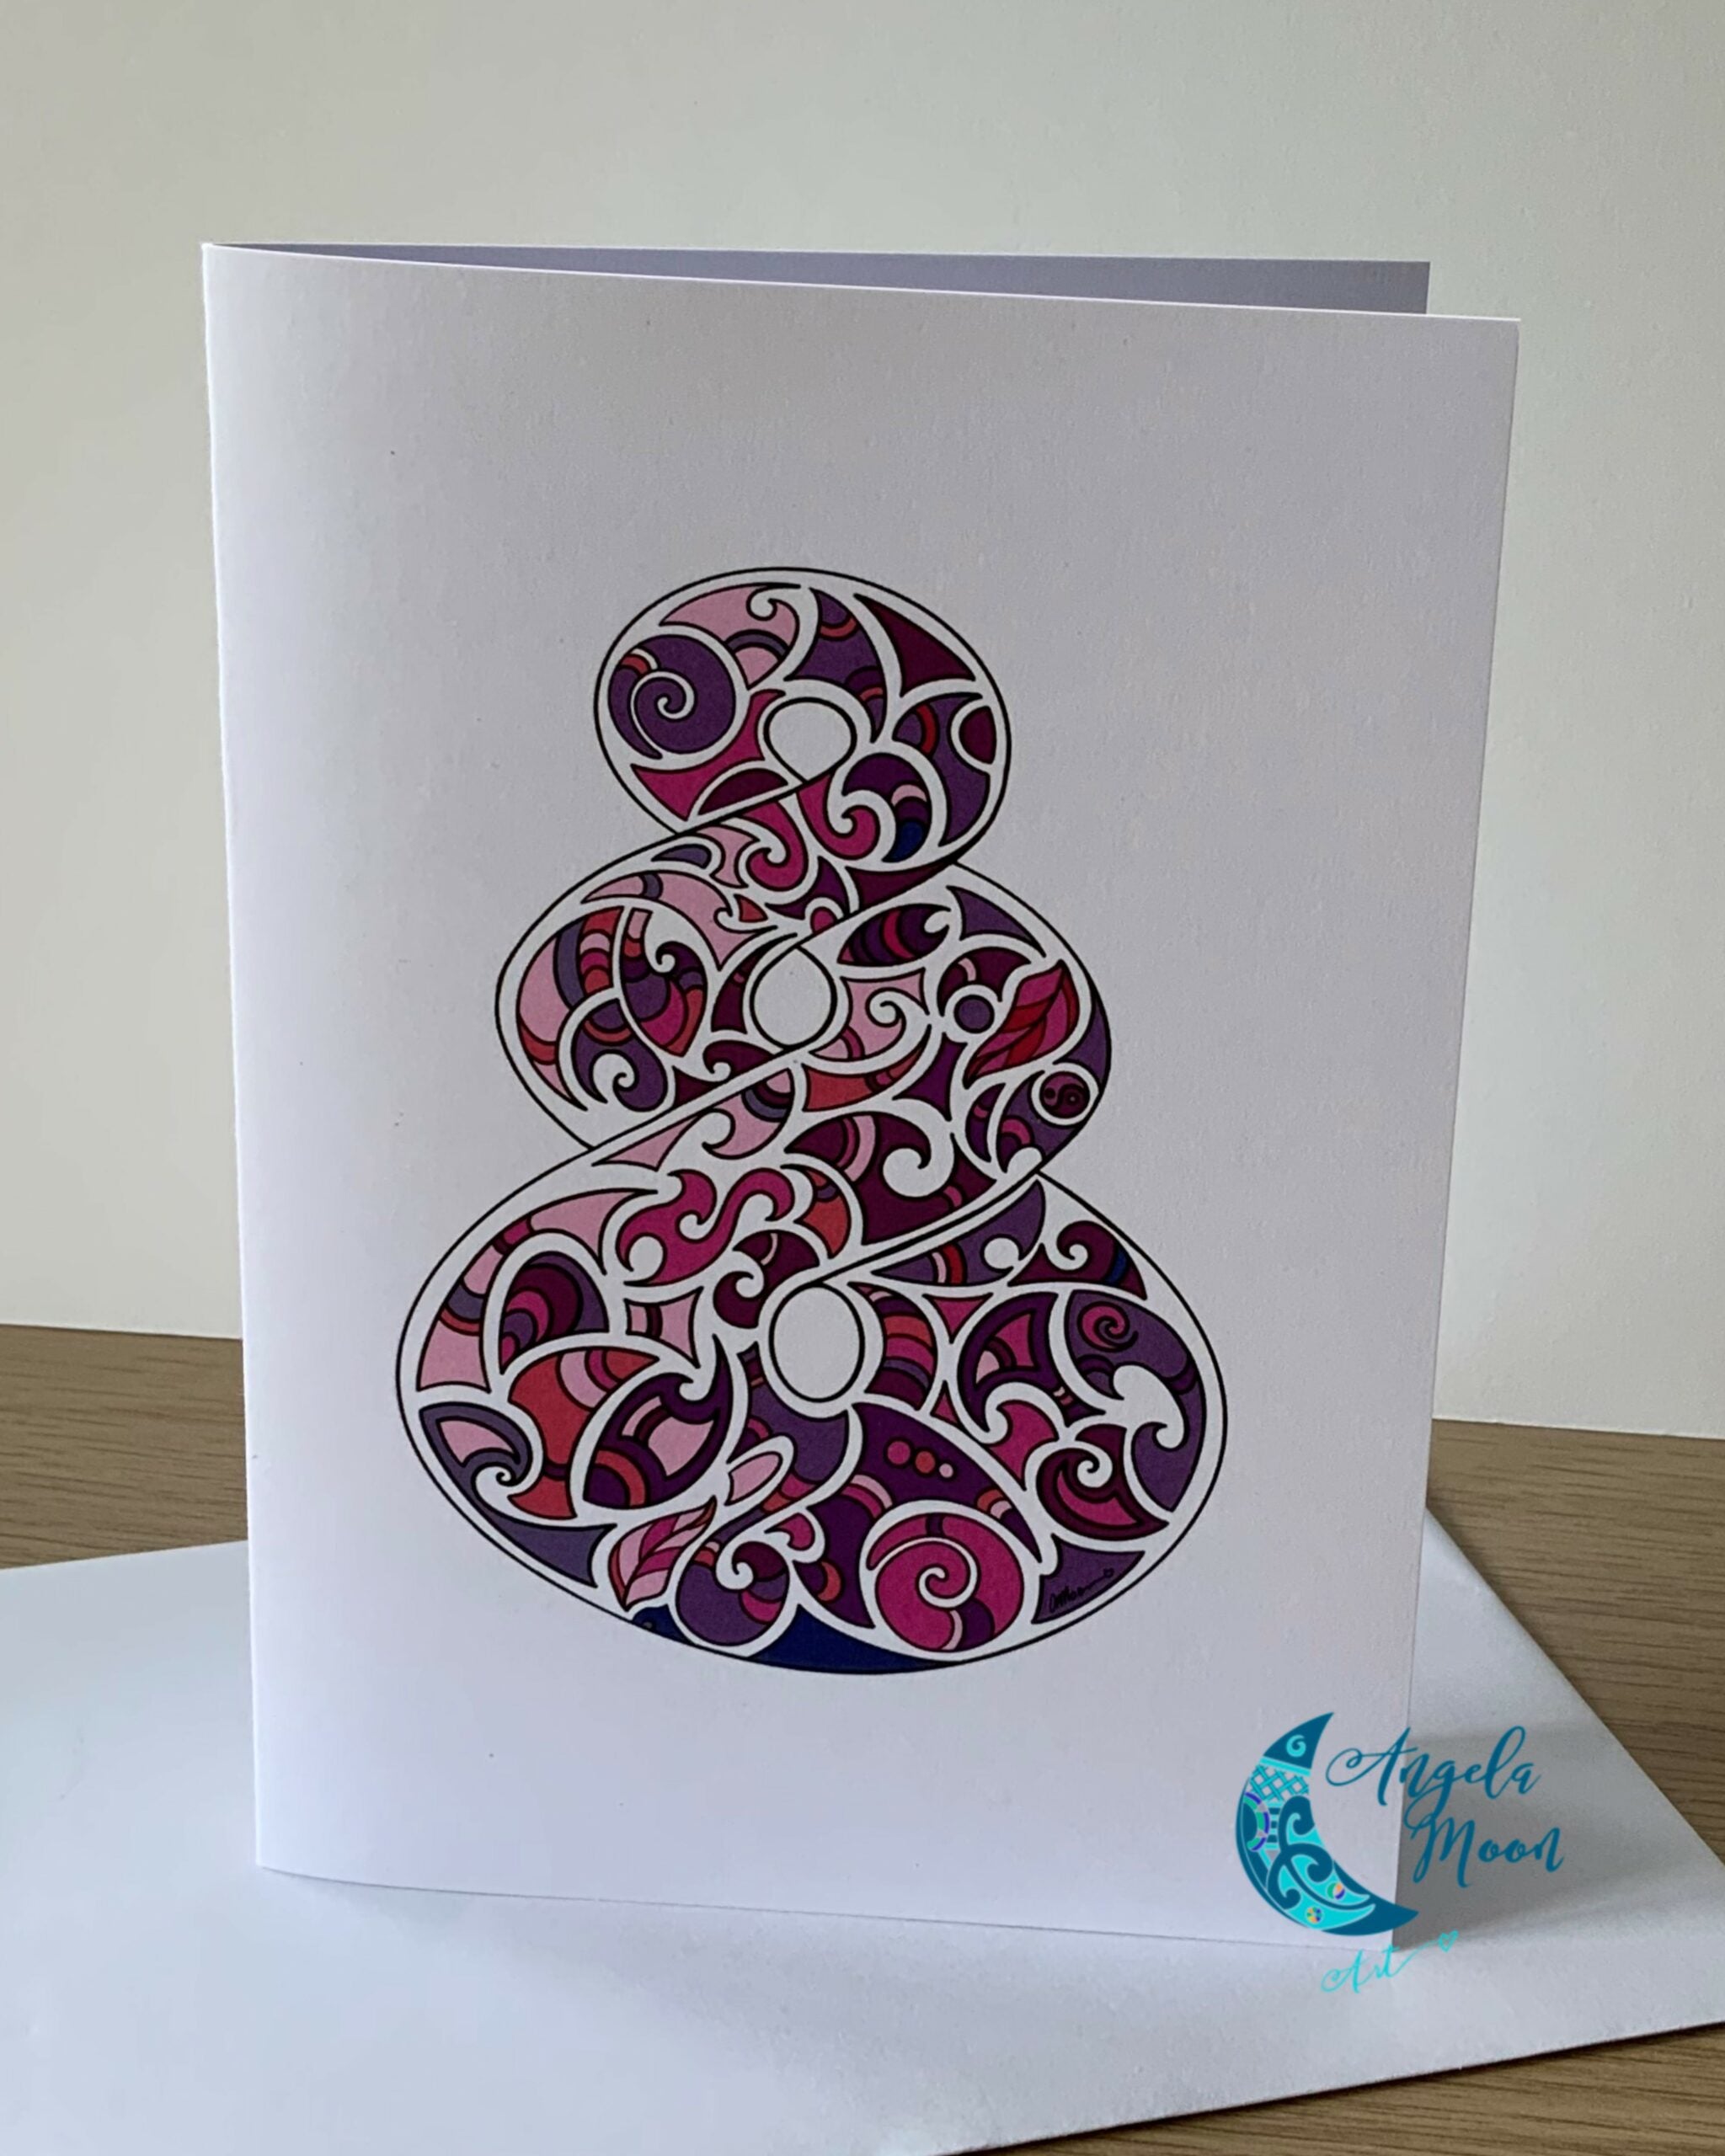 A Pink Pikorua Card featuring an intricate, purple filigree number "8" design on a white background, with the artist's signature "angela moed" at the bottom right corner. This Angela Moon Art product